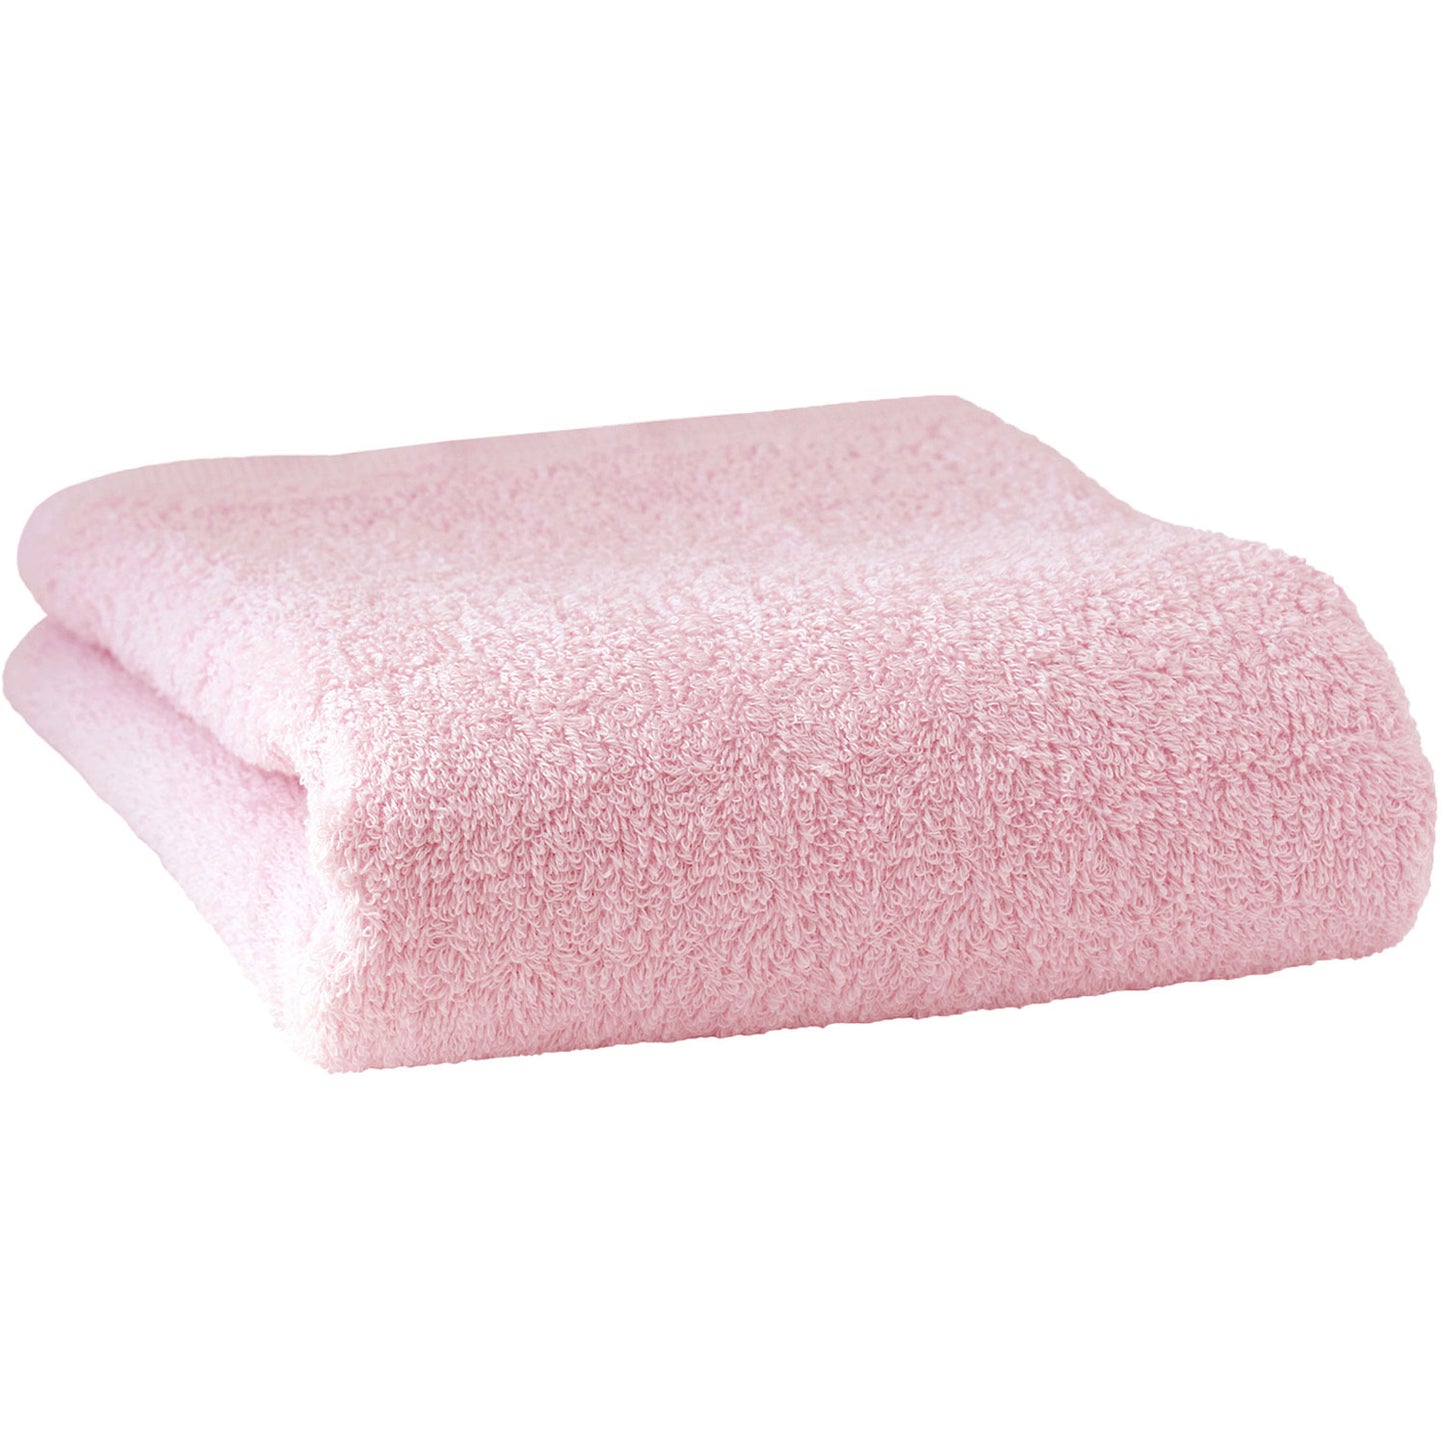 [Limited edition]Special Deal Hiorie Soft Water-Absorption Bath Towel Cotton